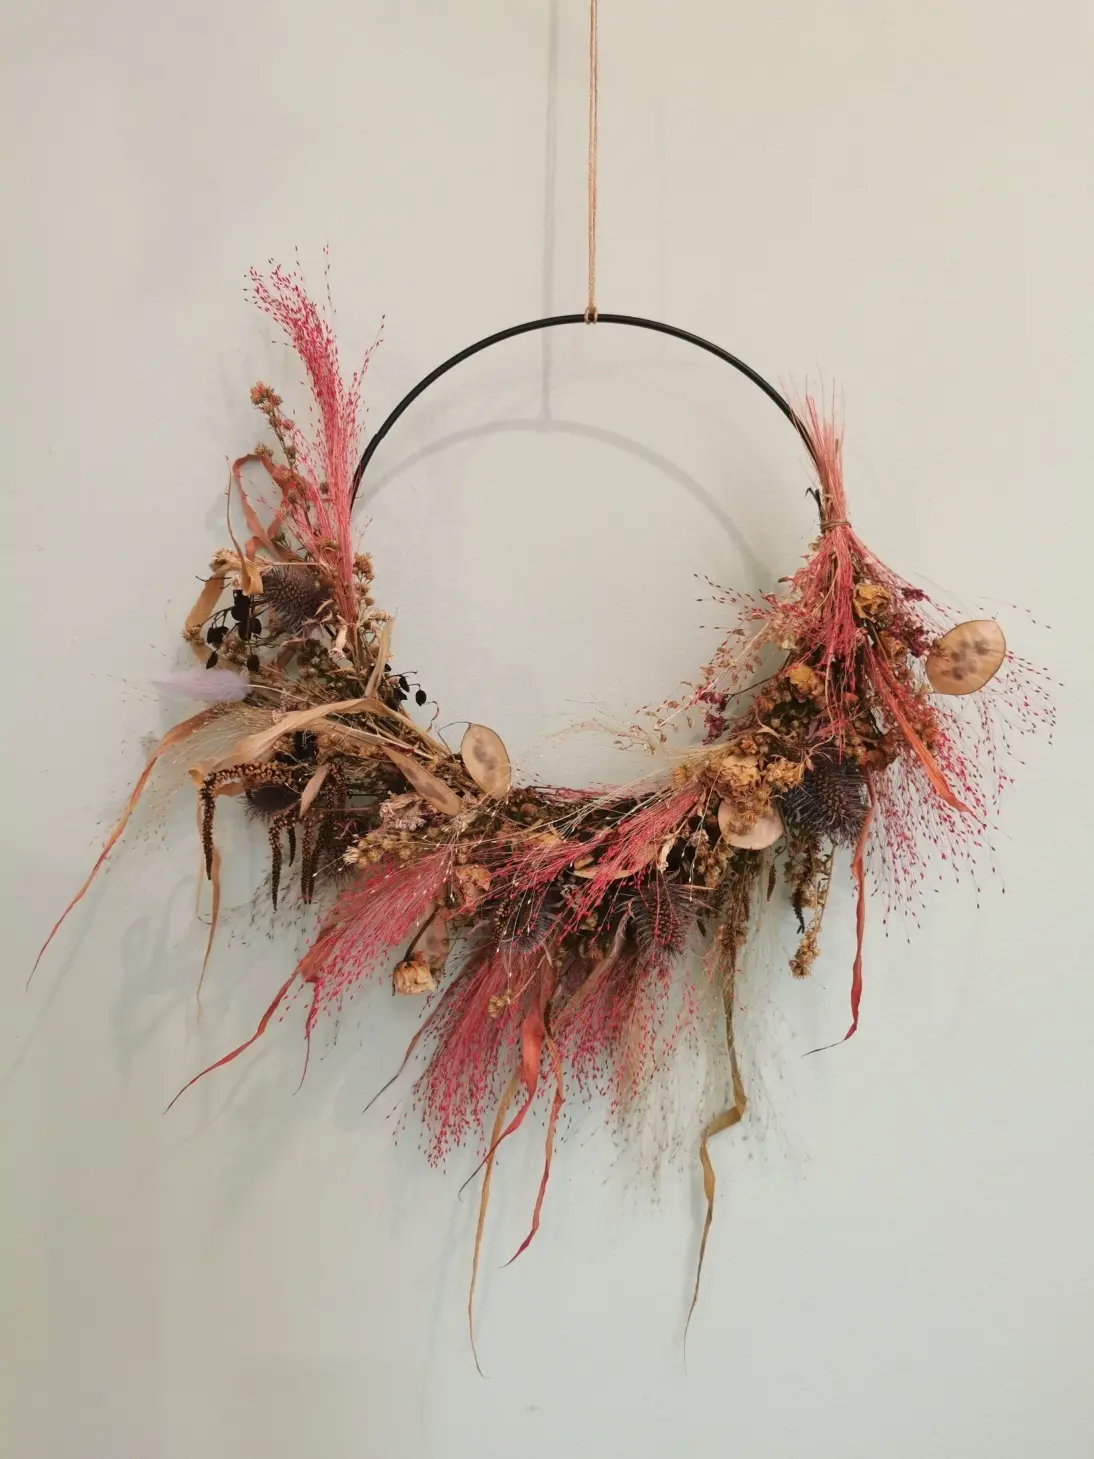 Pink grasses interspersed with elements of black and beige encapsulate this atmosphere.